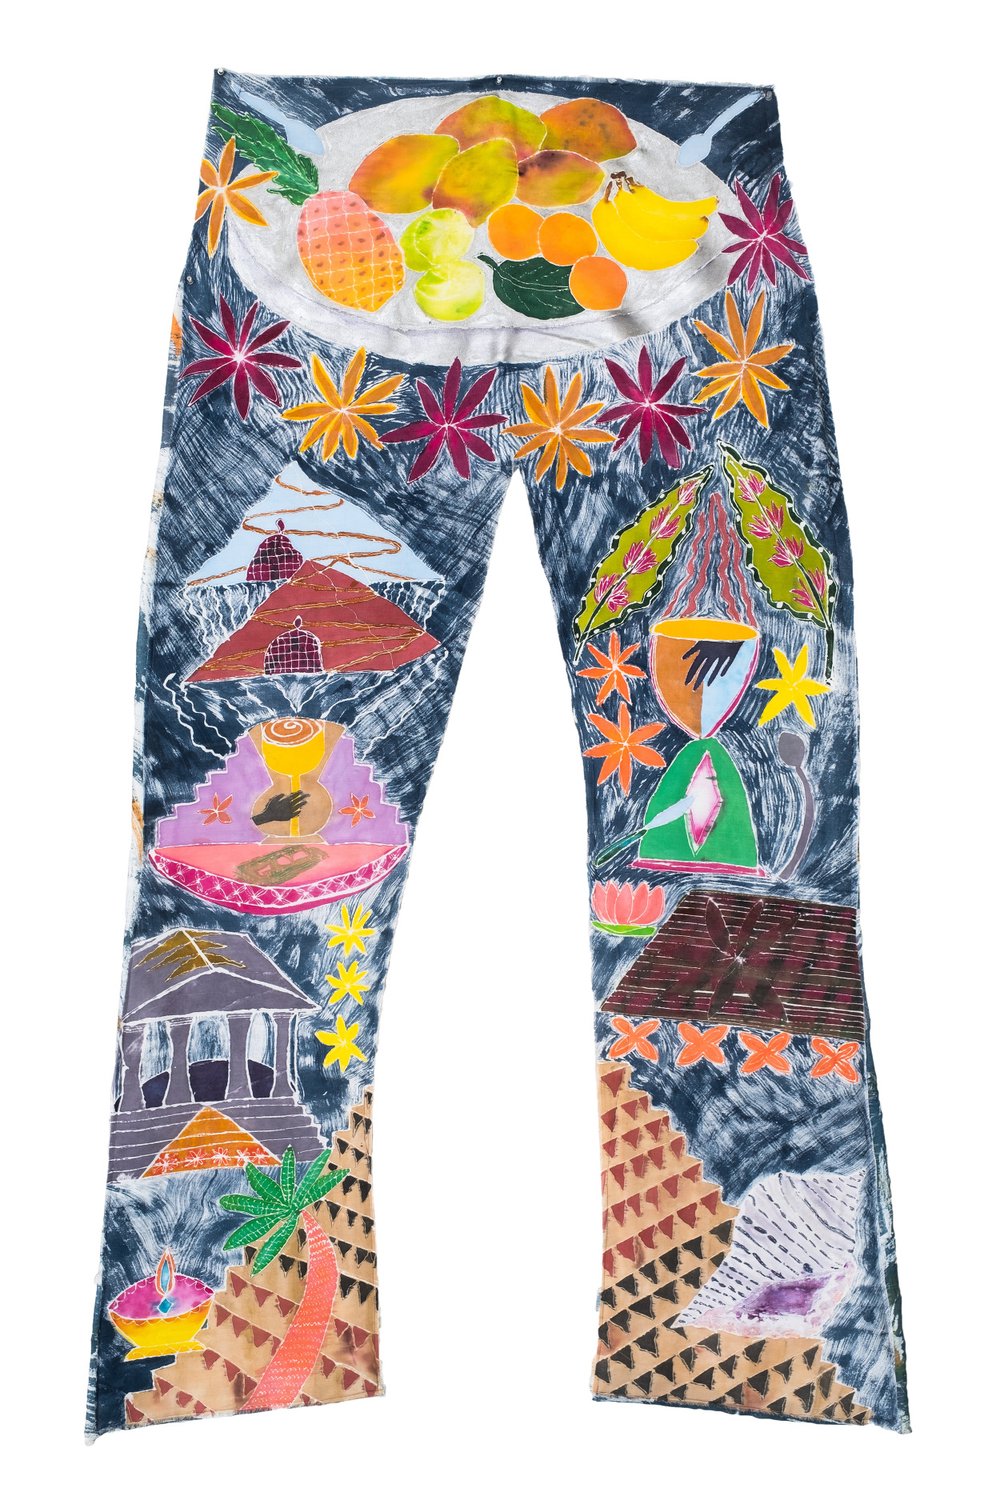   American Dream Jeans Too , 78" x 48", Resist, dye, polyester, and stitching on fabric, 2018 